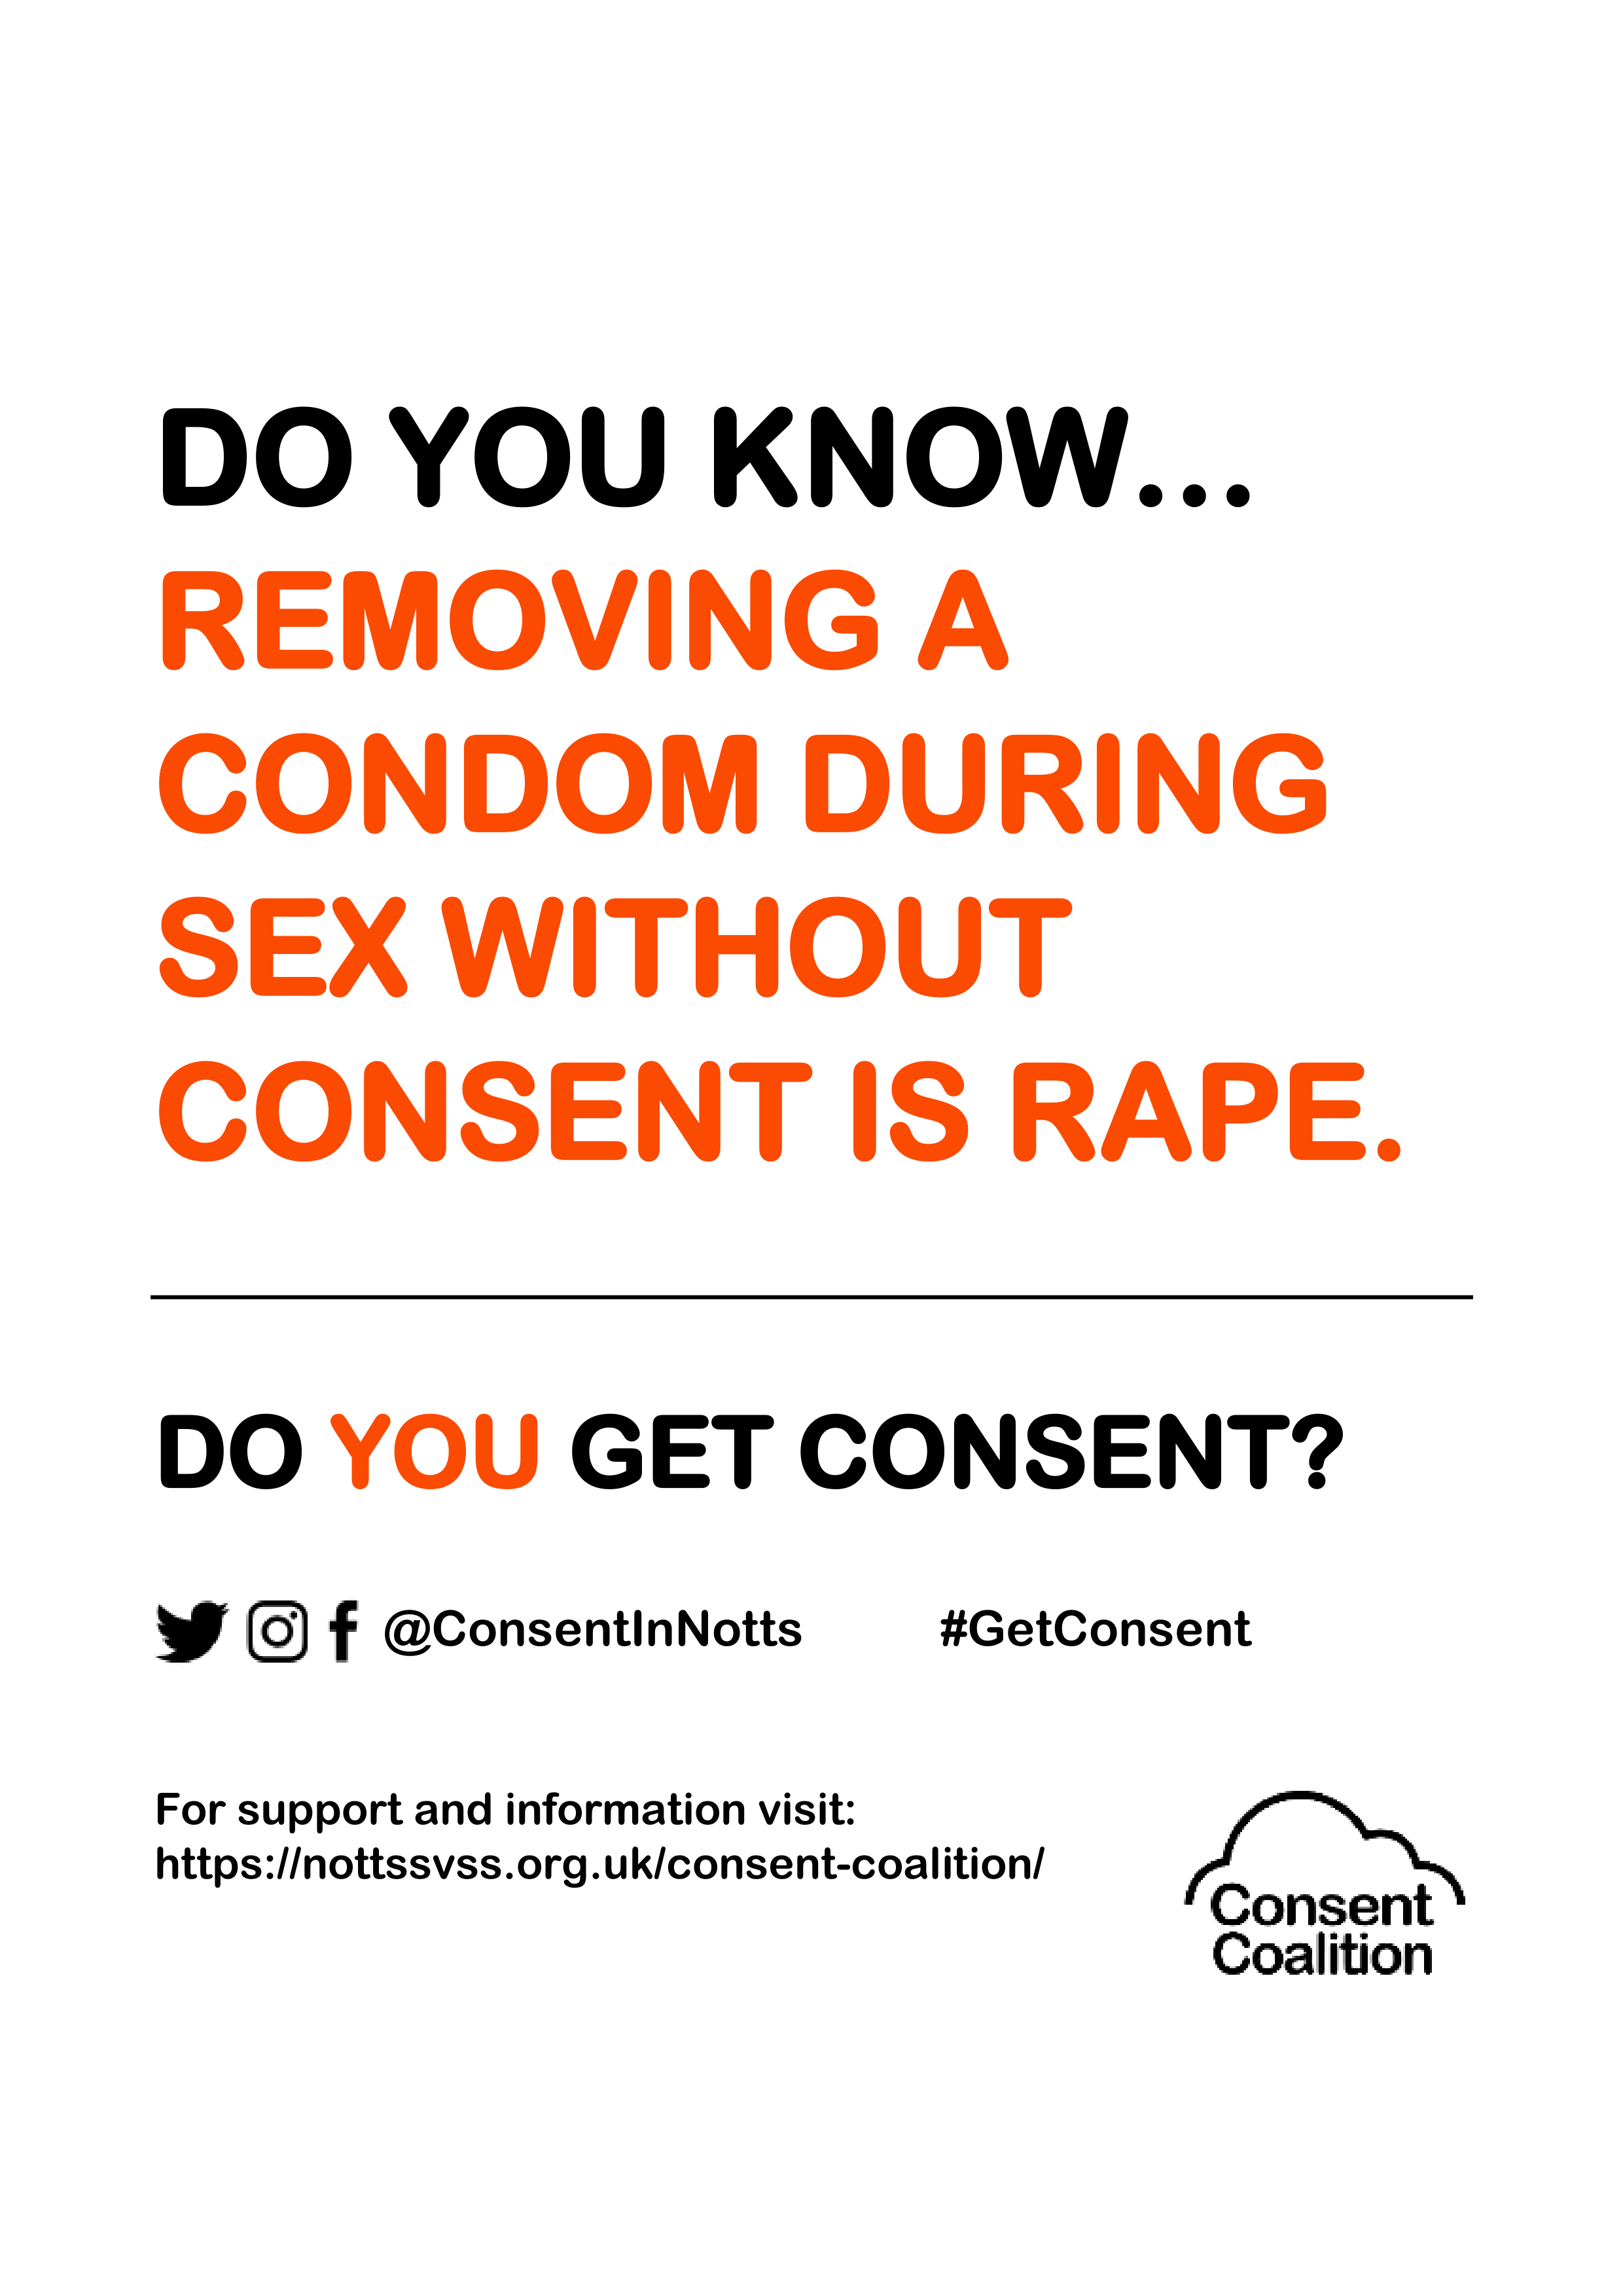 Consent Coalition picture